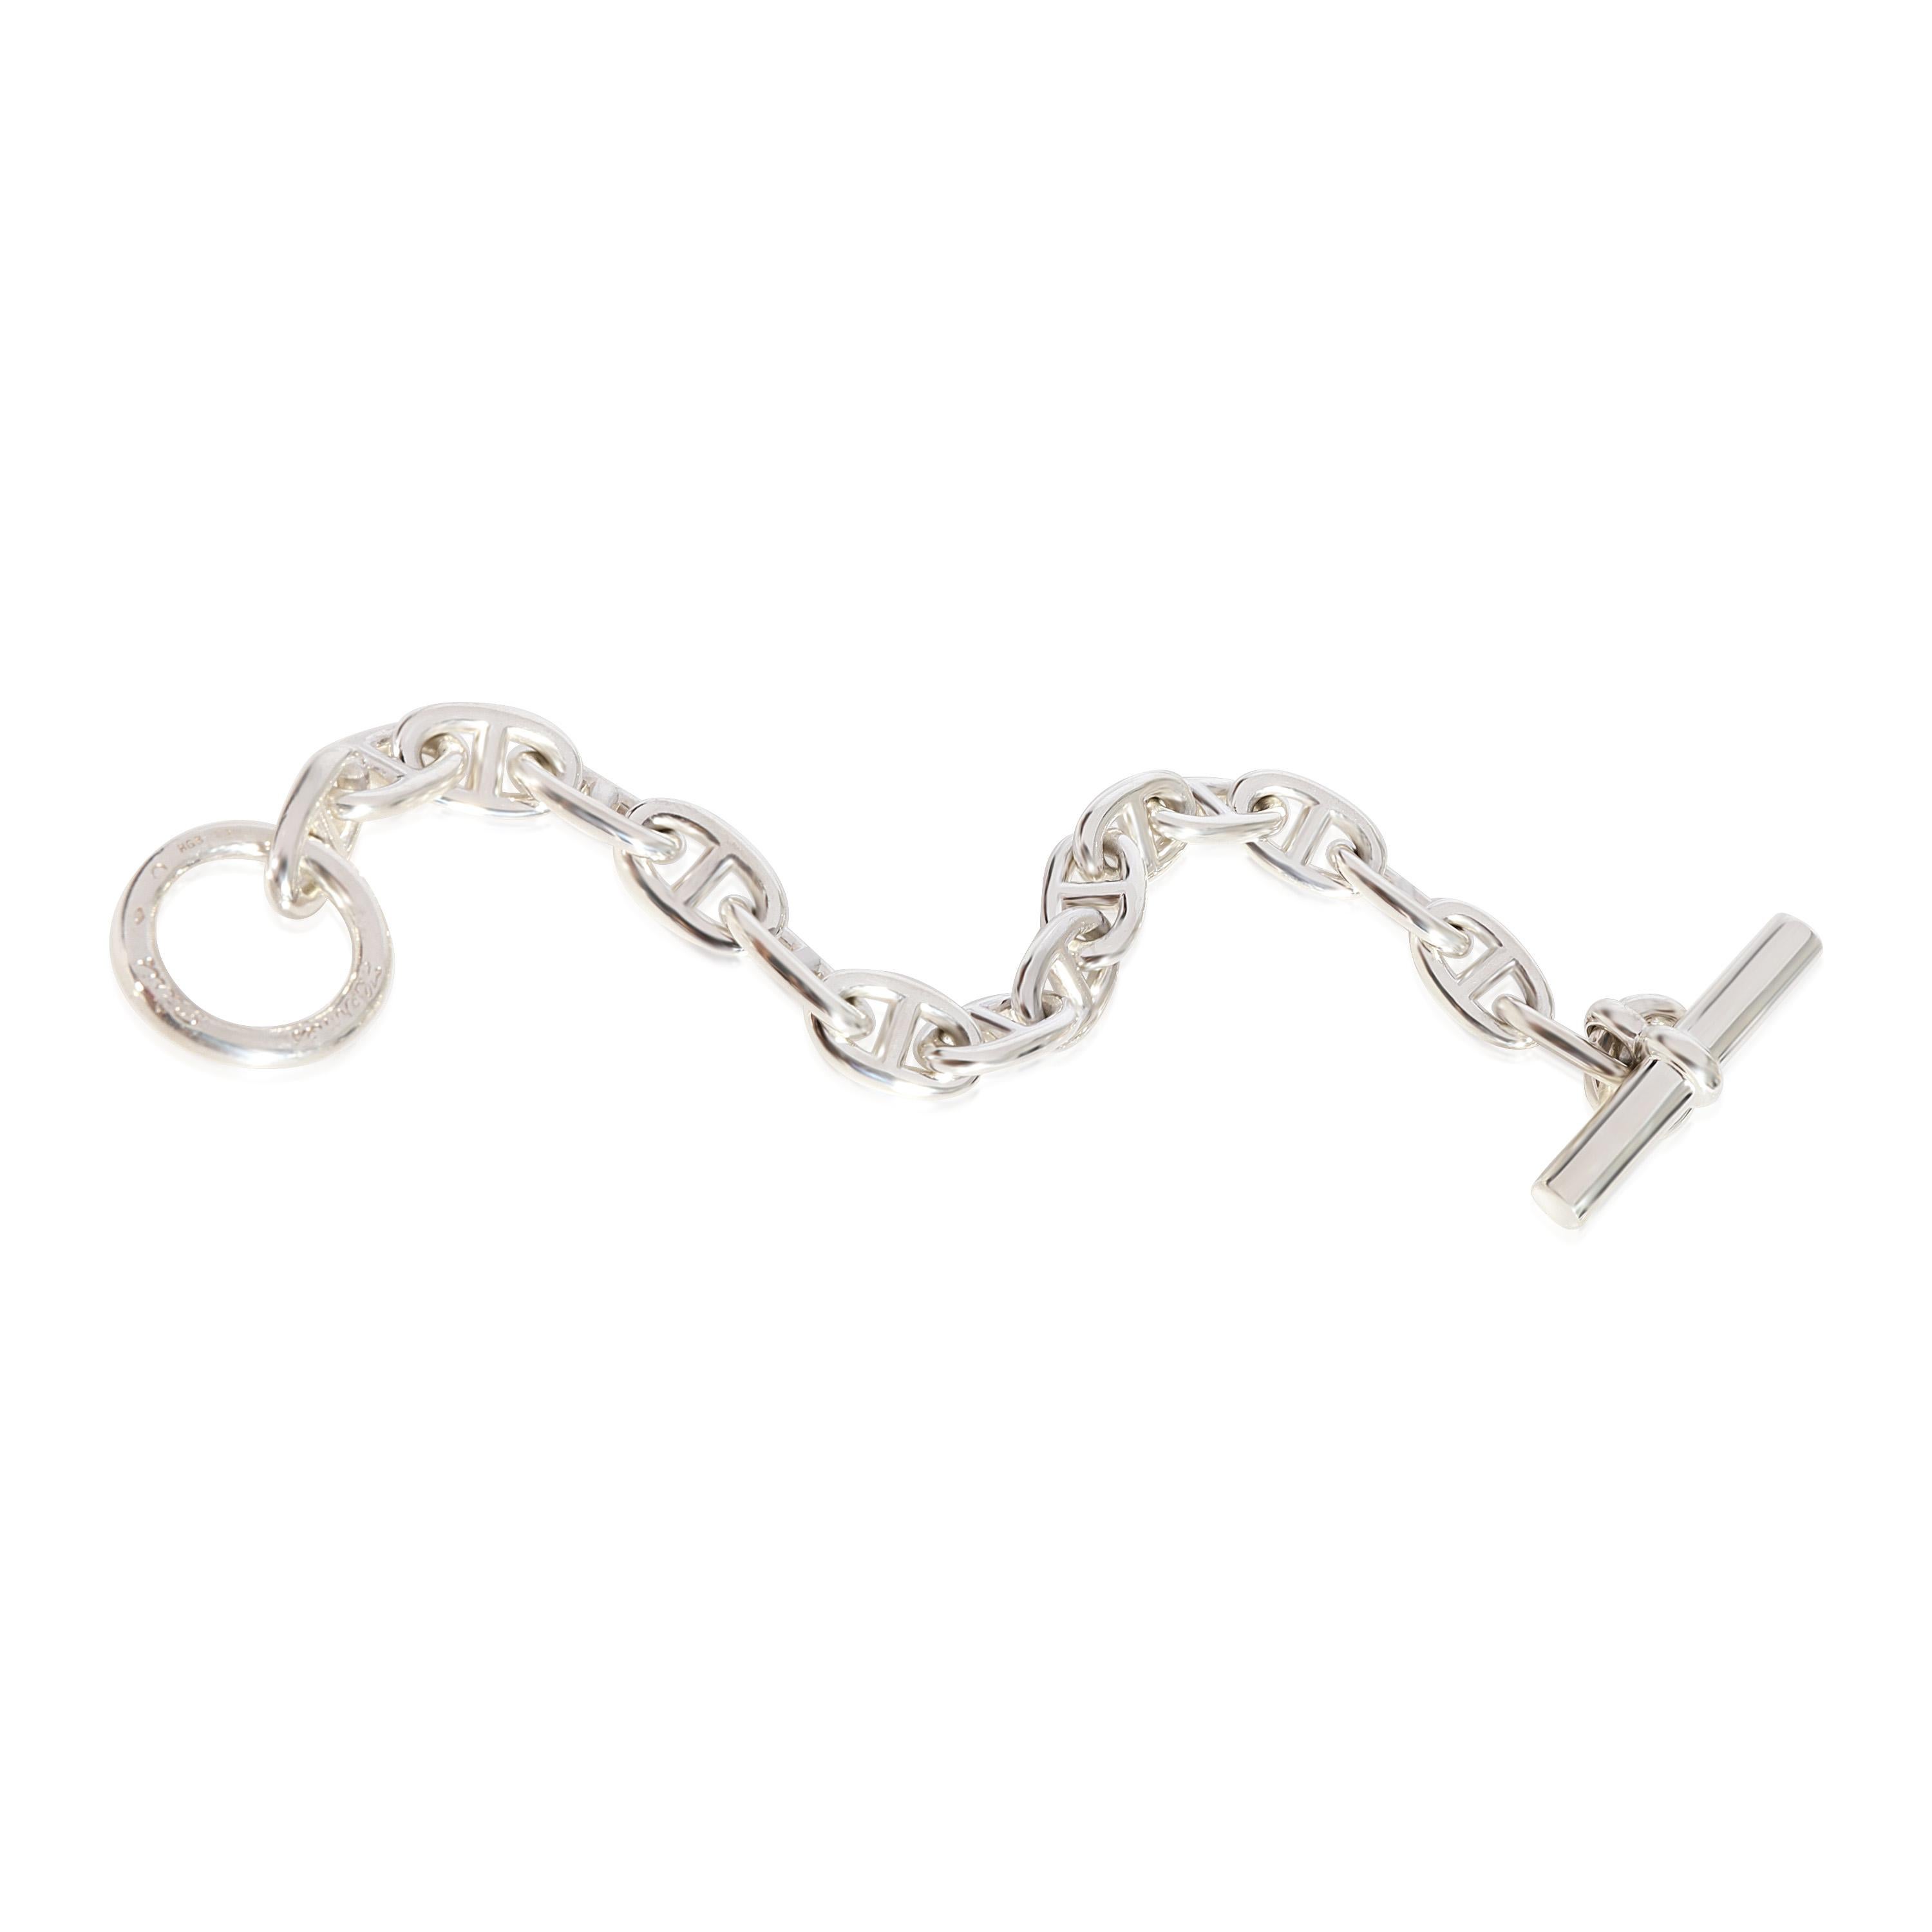 Hermès Chaine D'ancre Bracelet in 925 Sterling Silver

PRIMARY DETAILS
SKU: 123680
Listing Title: Hermès Chaine D'ancre Bracelet in 925 Sterling Silver
Condition Description: Retails for 1300 USD. In excellent condition and recently polished. 7.5